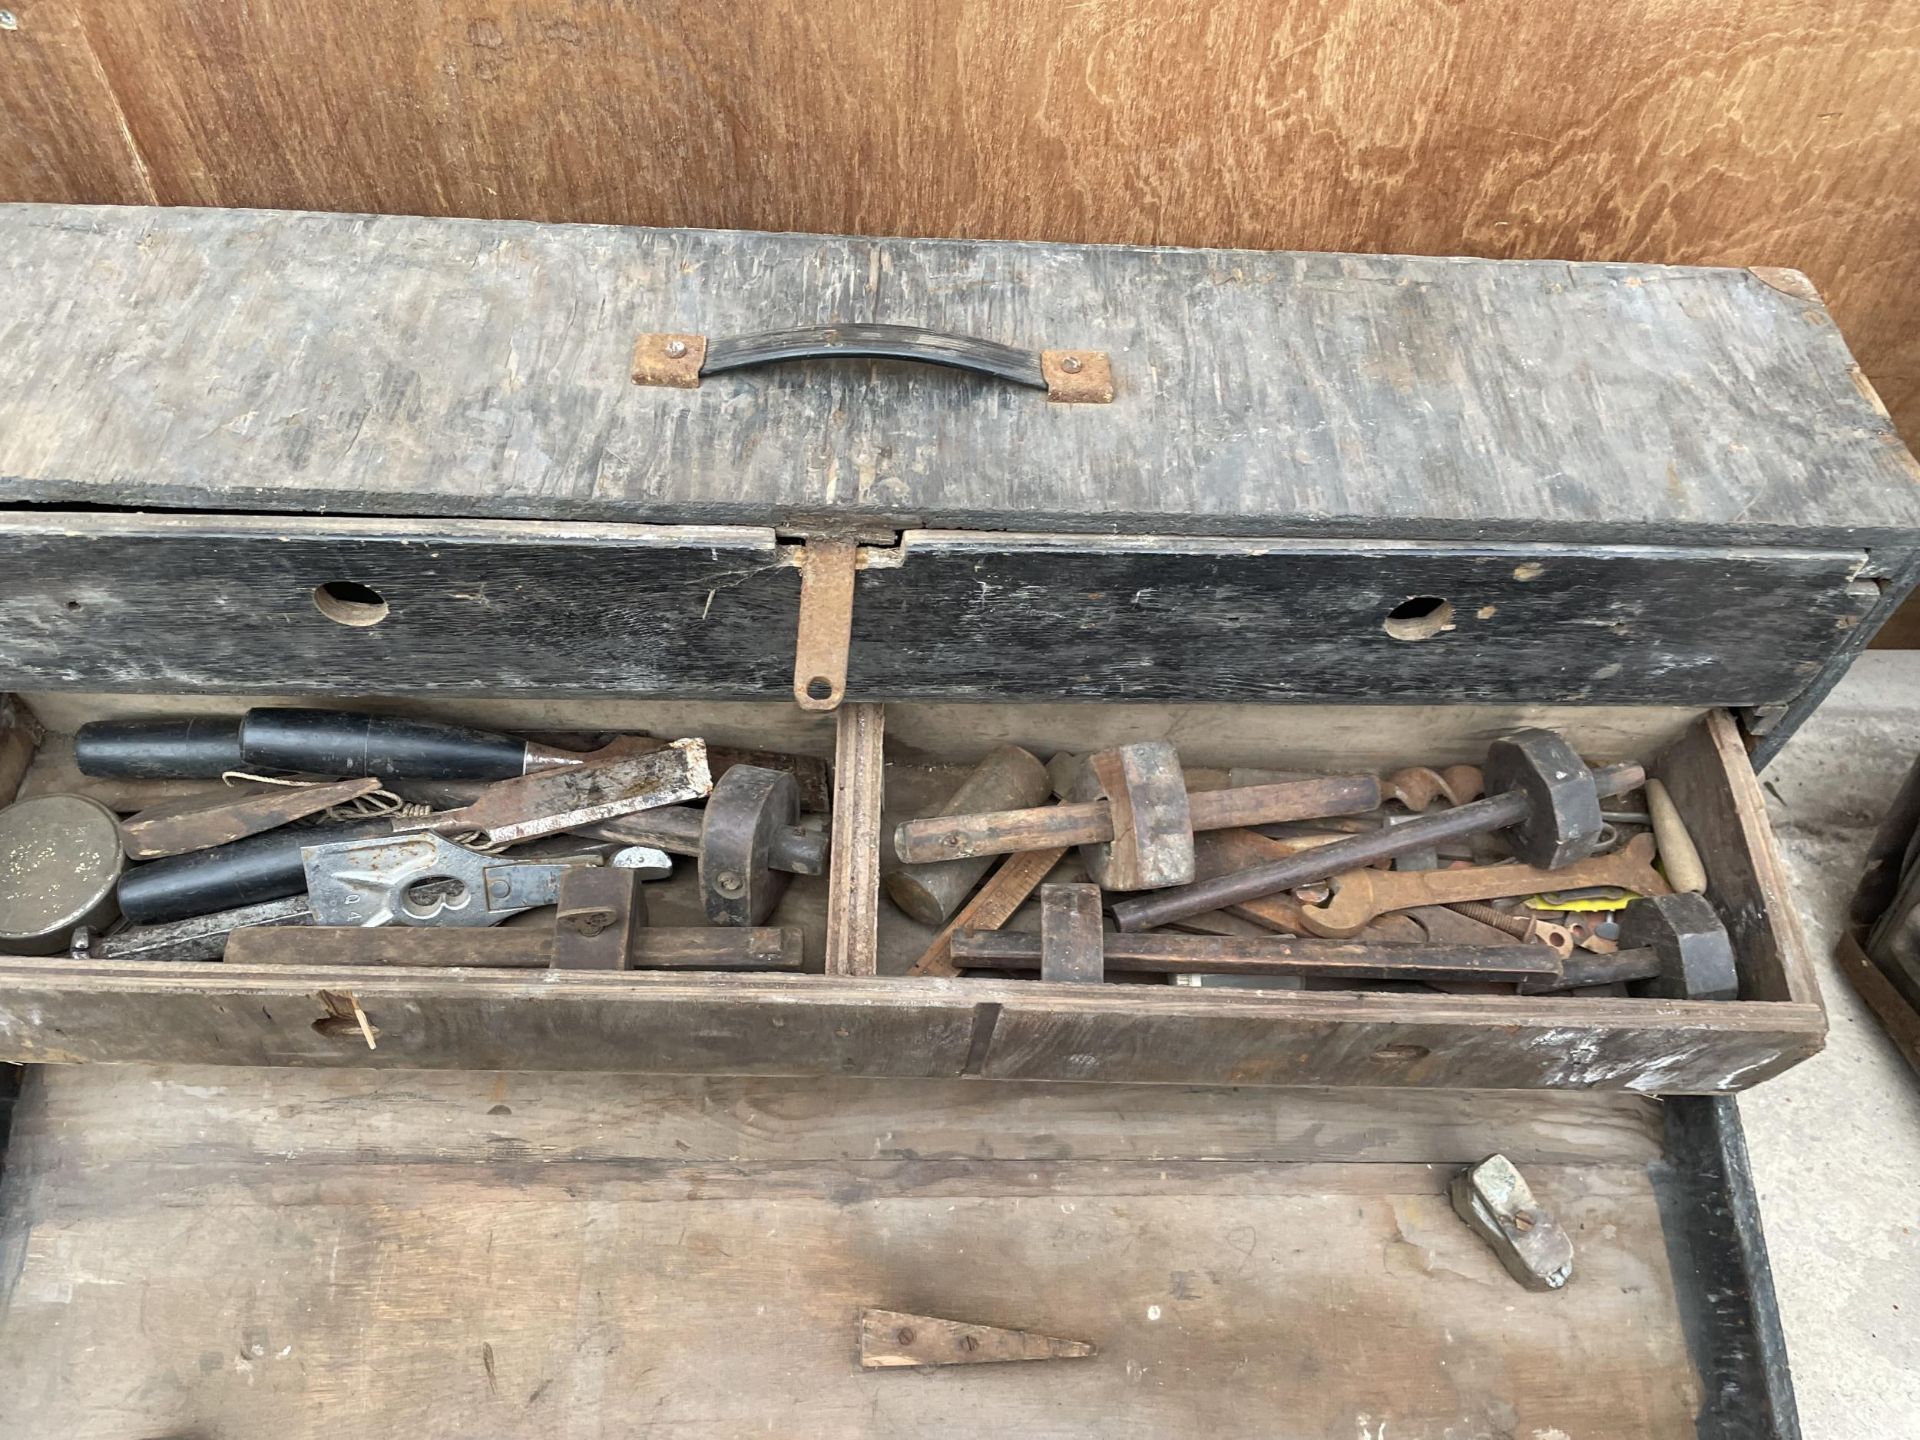 A VINTAGE WOODEN JOINERS CHEST WITH AN ASSORTMENT OF TOOLS TO INCLUDE HAMMERS AND WOOD PLANES ETC - Image 6 of 6